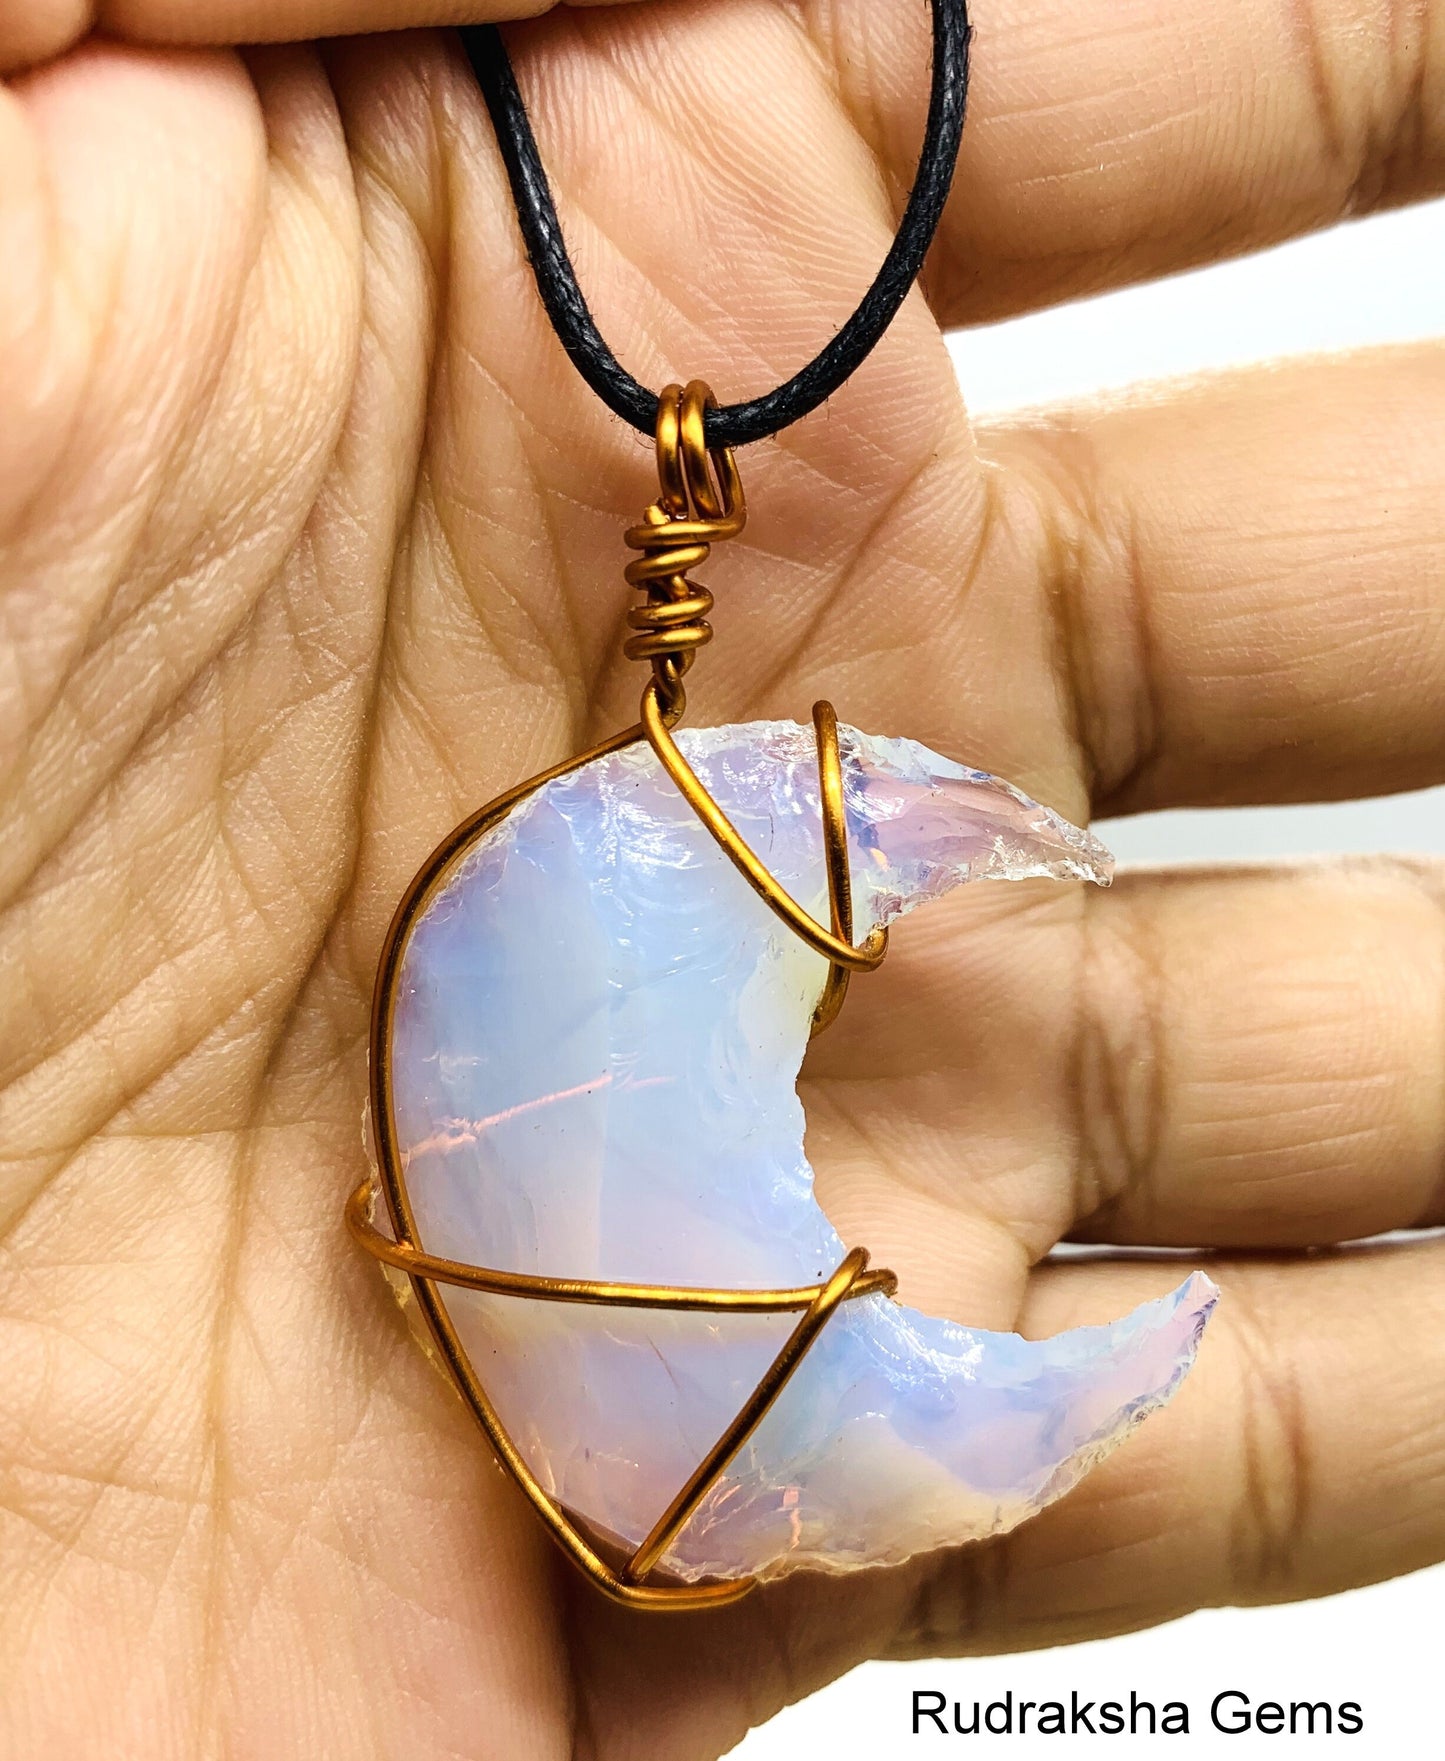 Opal Moon Pendant, Opalite Crystal, Opalite Necklace, Wire Wrapped Copper Pendant, Boho Jewelry, Reiki Energy Charged Crystal pendant